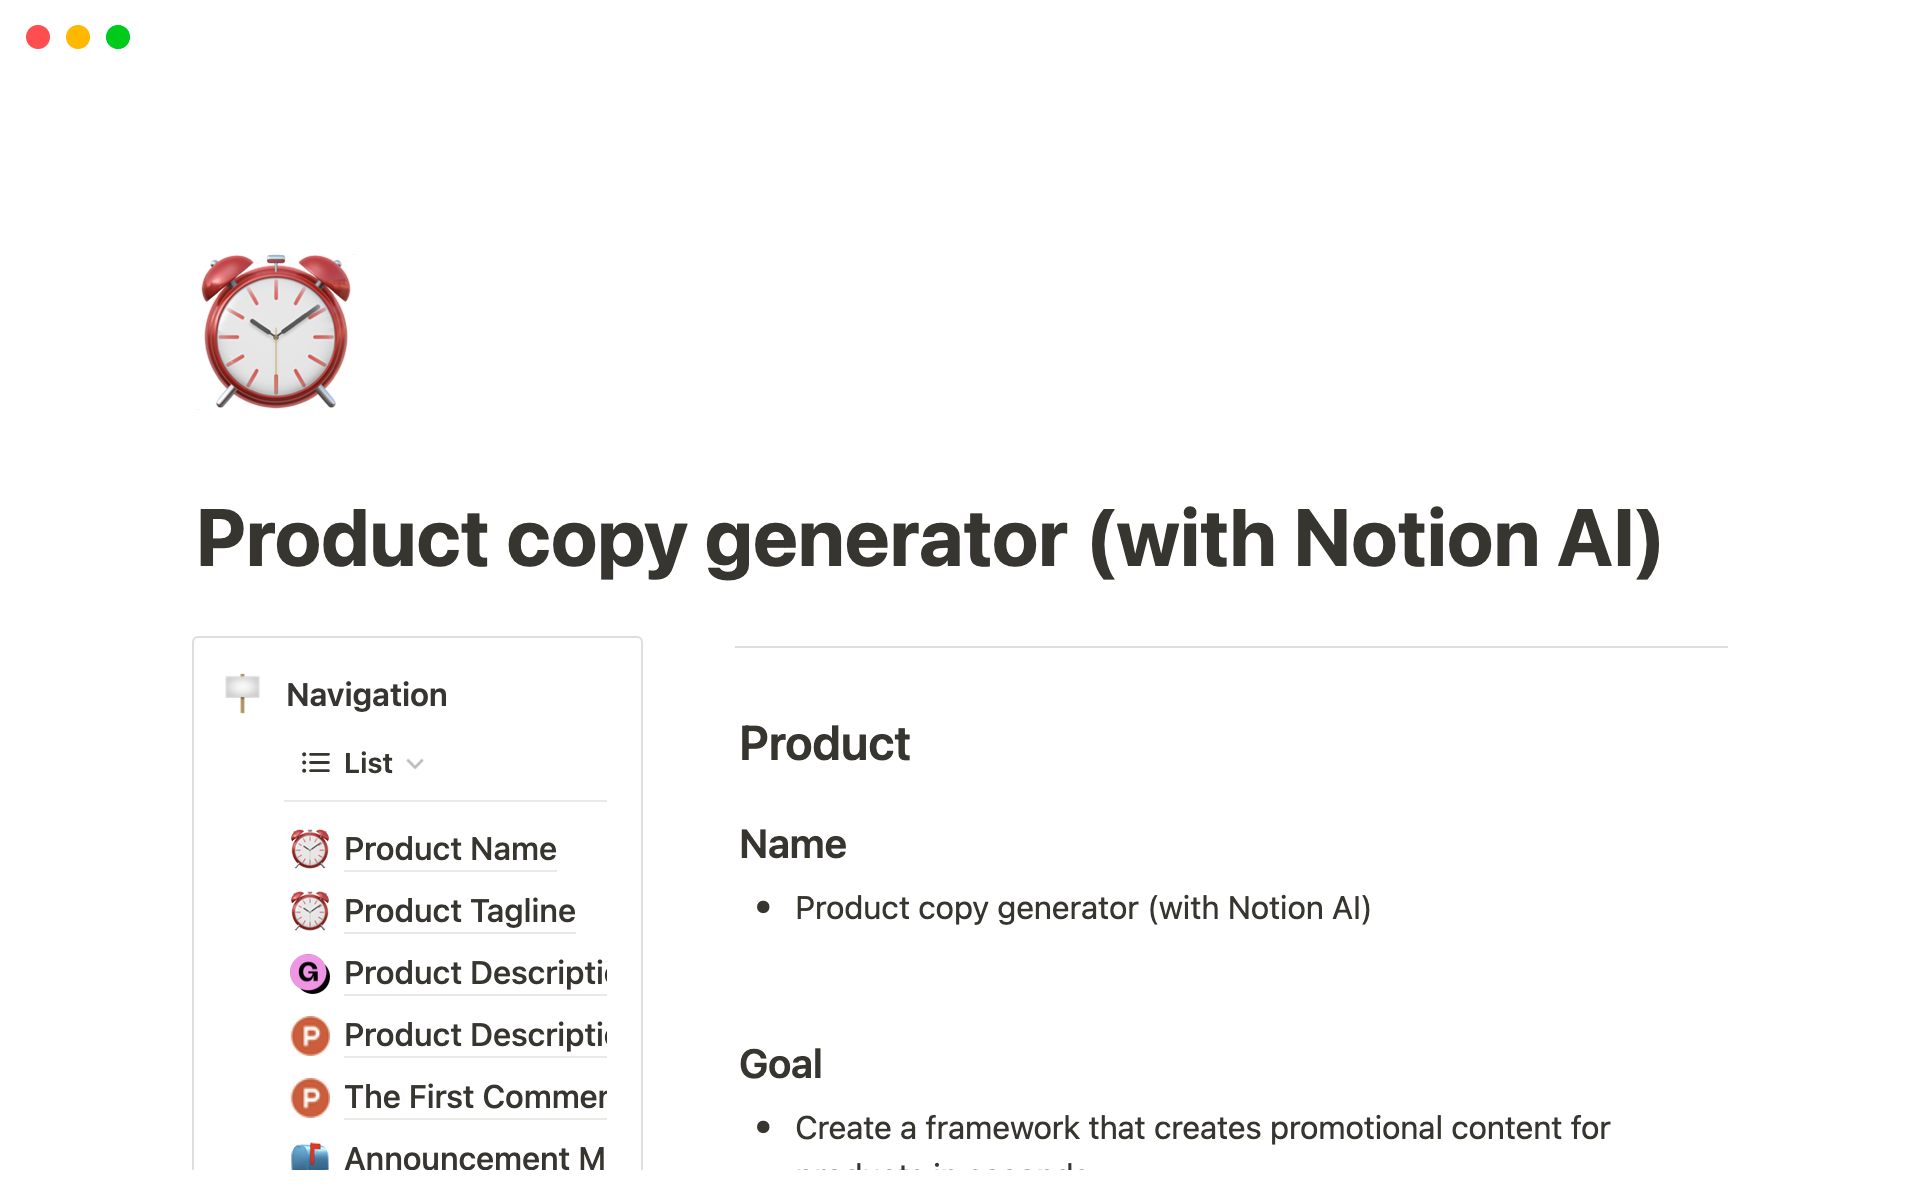 Product copy generator provides an extremely simple framework to create any product-related content in seconds.